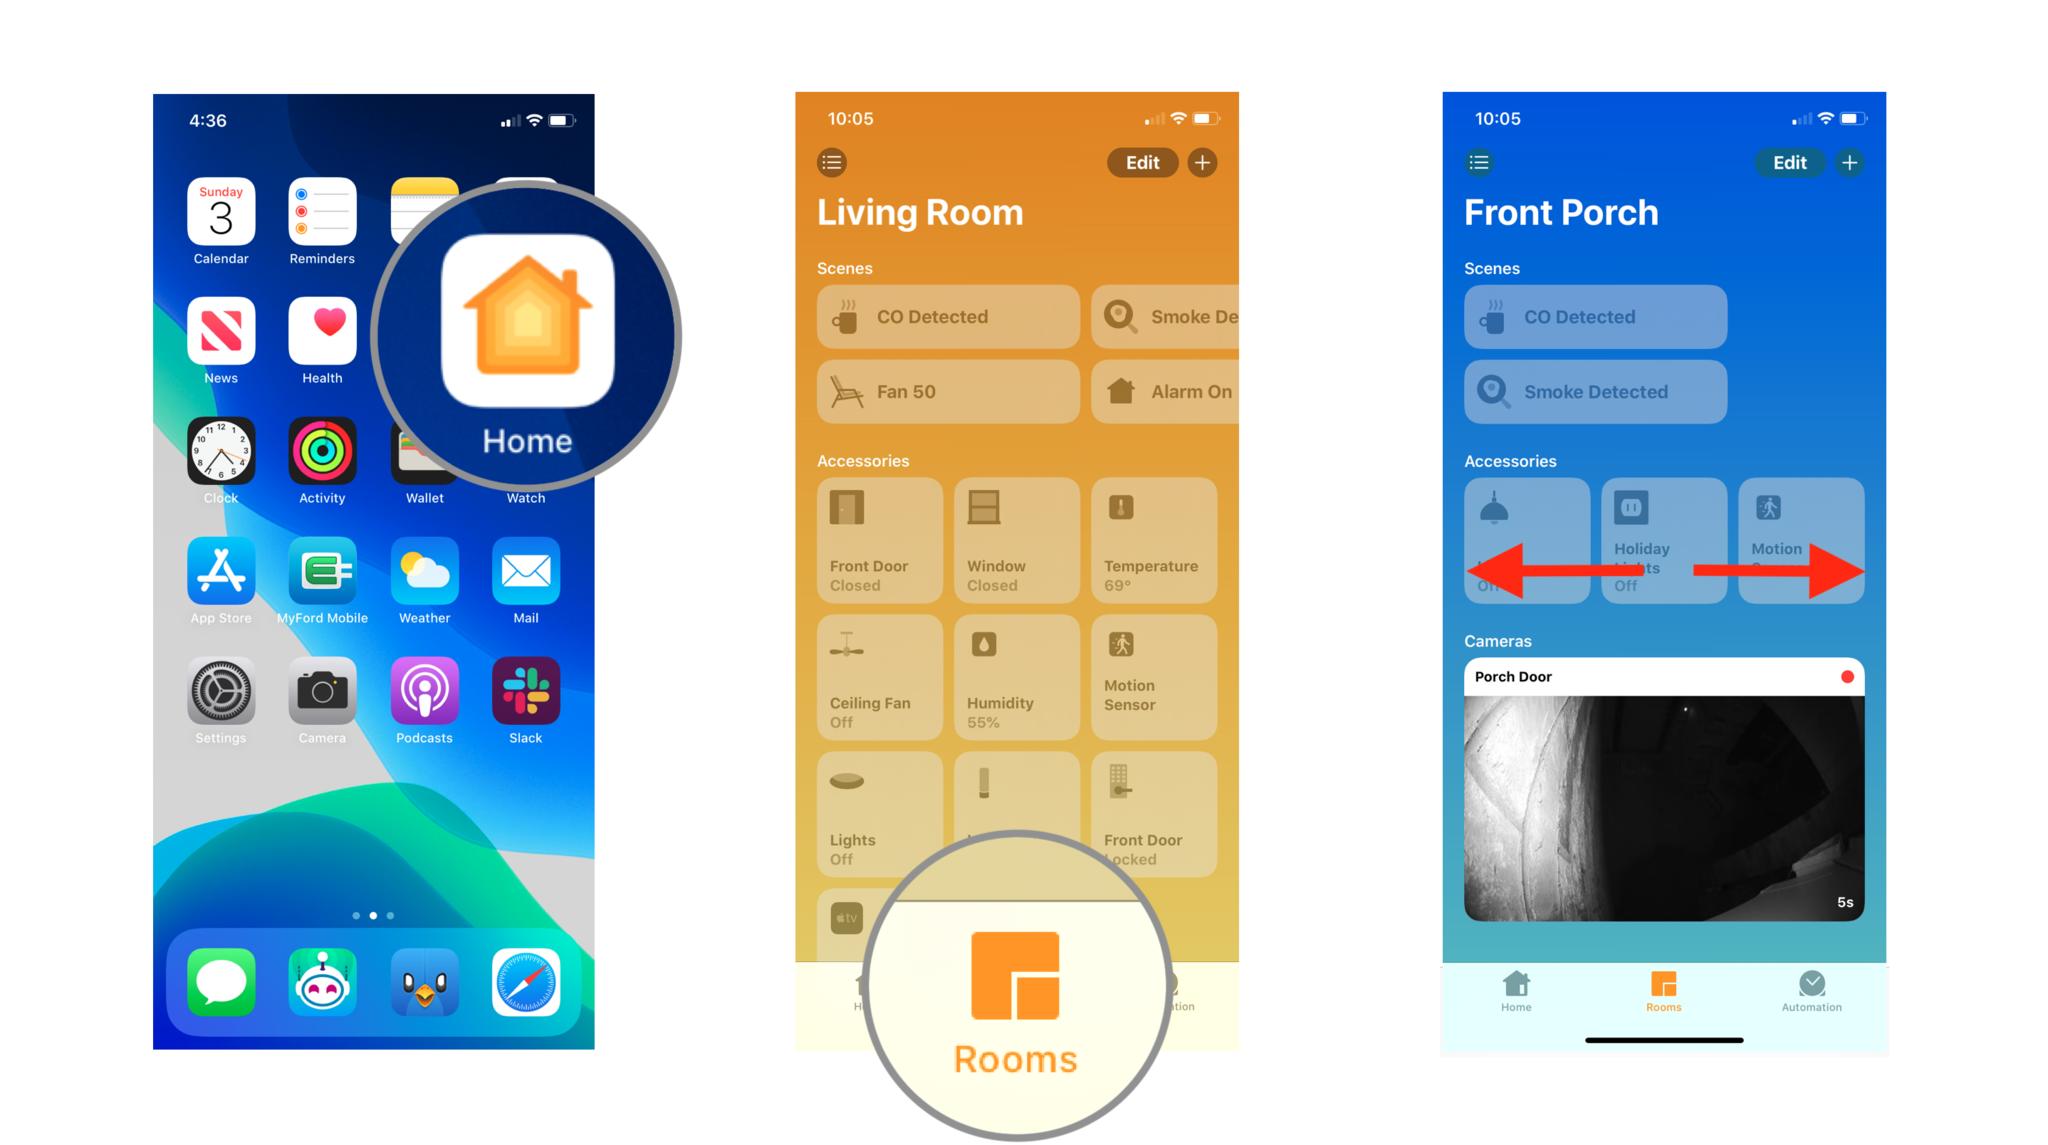 Steps 1-3 depicting how to view recorded video in the Home app